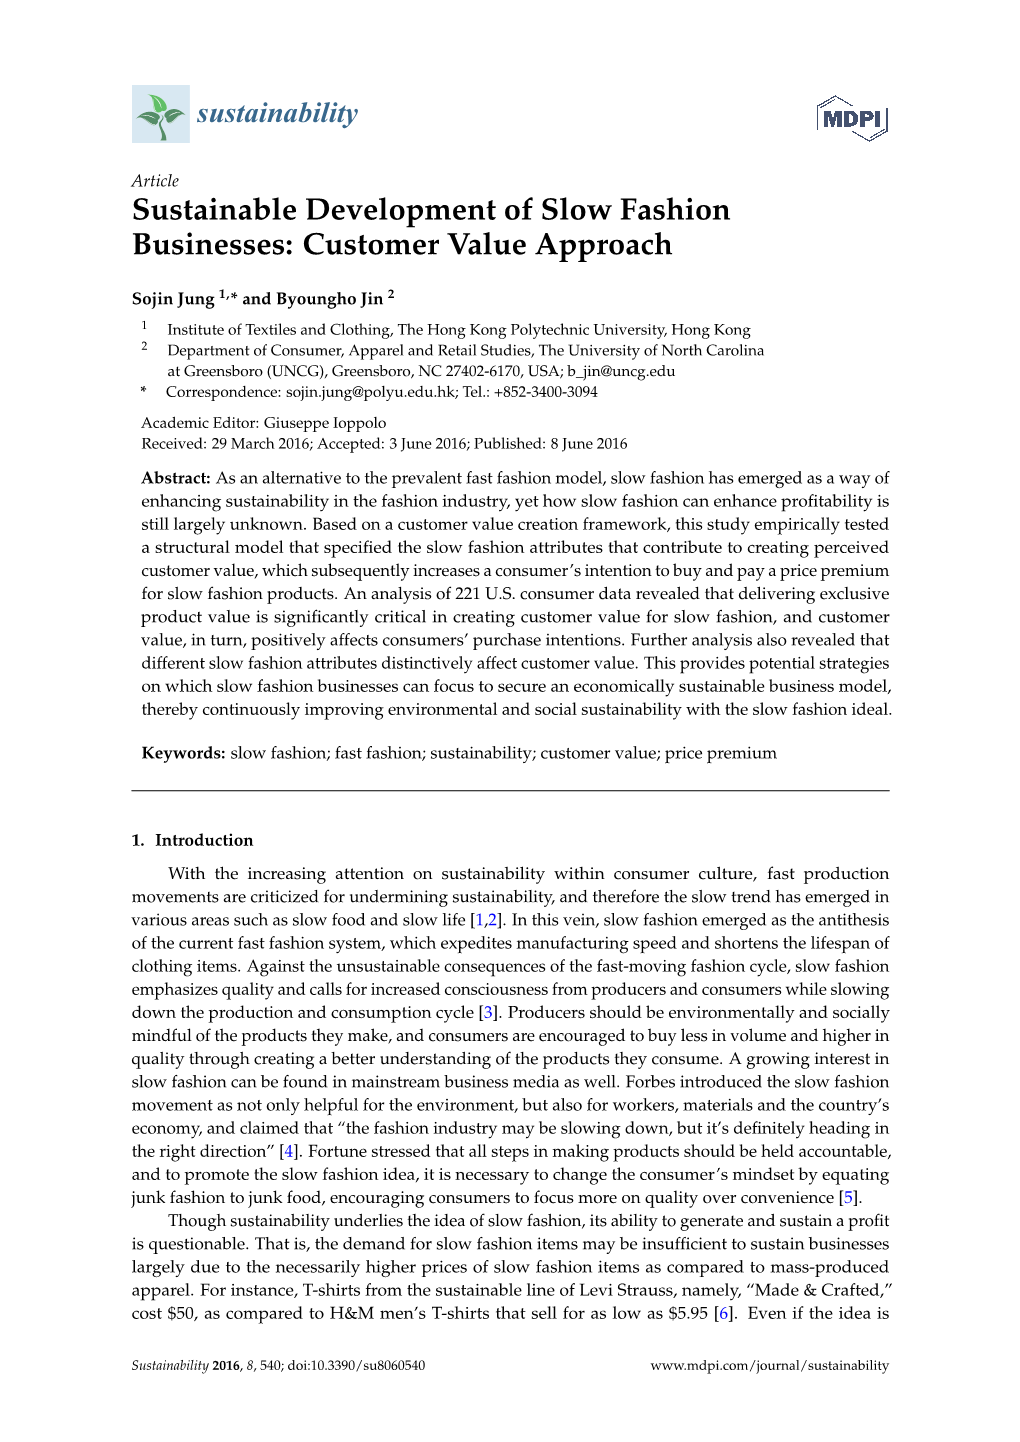 Sustainable Development of Slow Fashion Businesses: Customer Value Approach